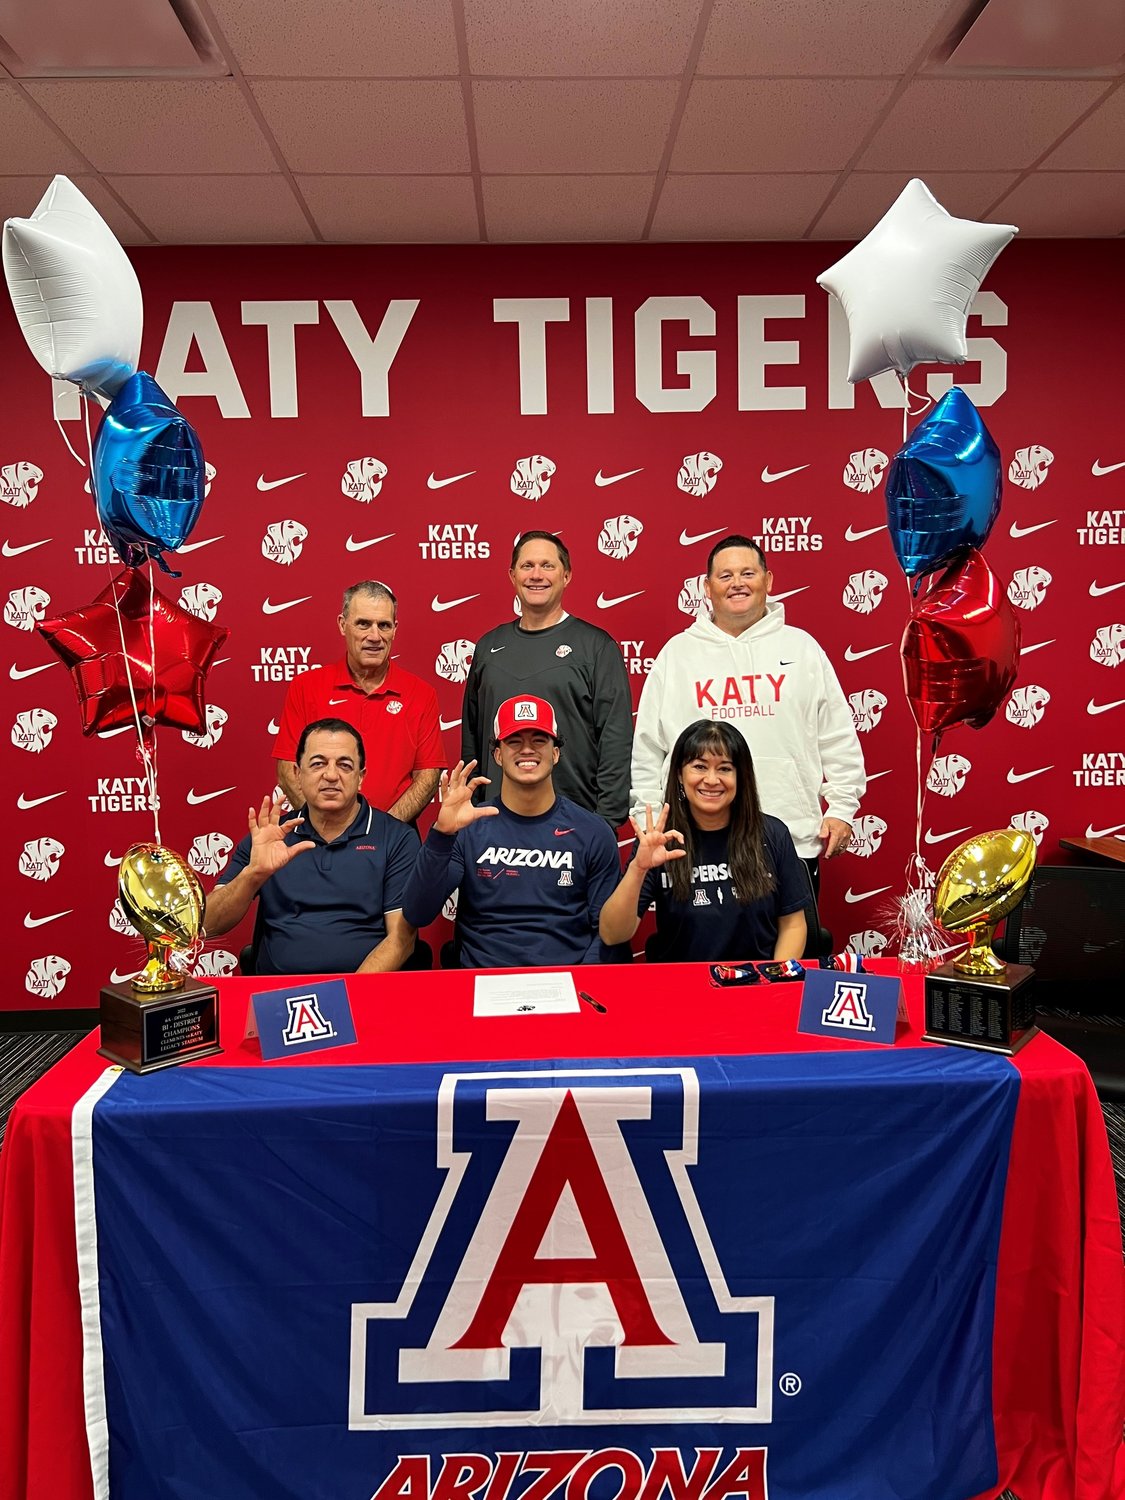 Arian Parish signed to play football at the University of Arizona over the winter signing period.